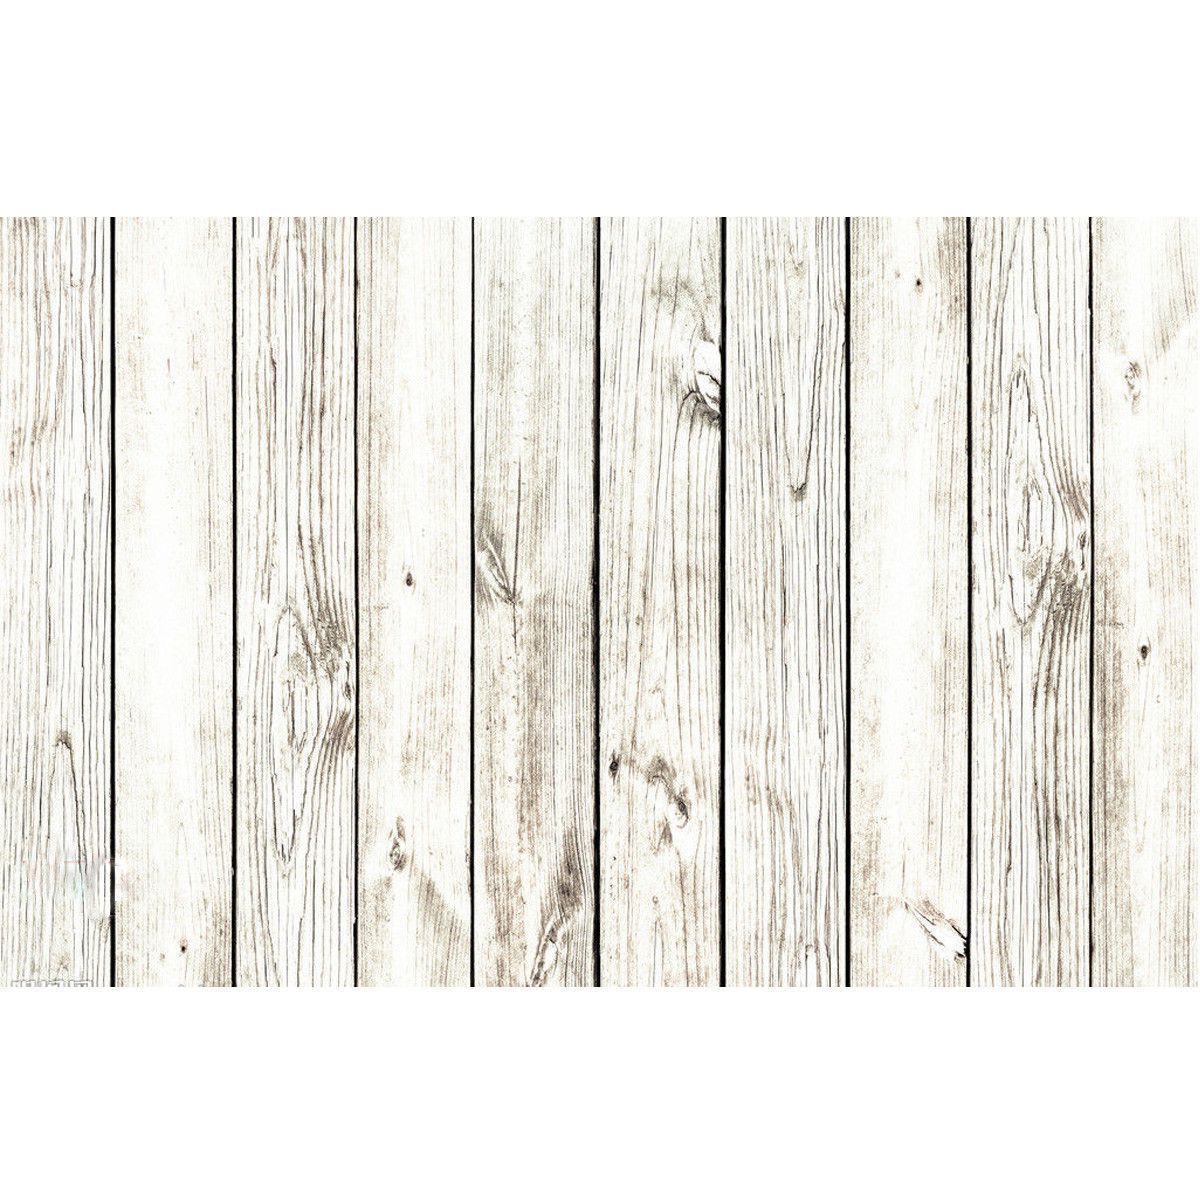 3x5FT-Wood-Wall-Vintage-Photography-Backdrop-Background-Studio-Prop-1385406